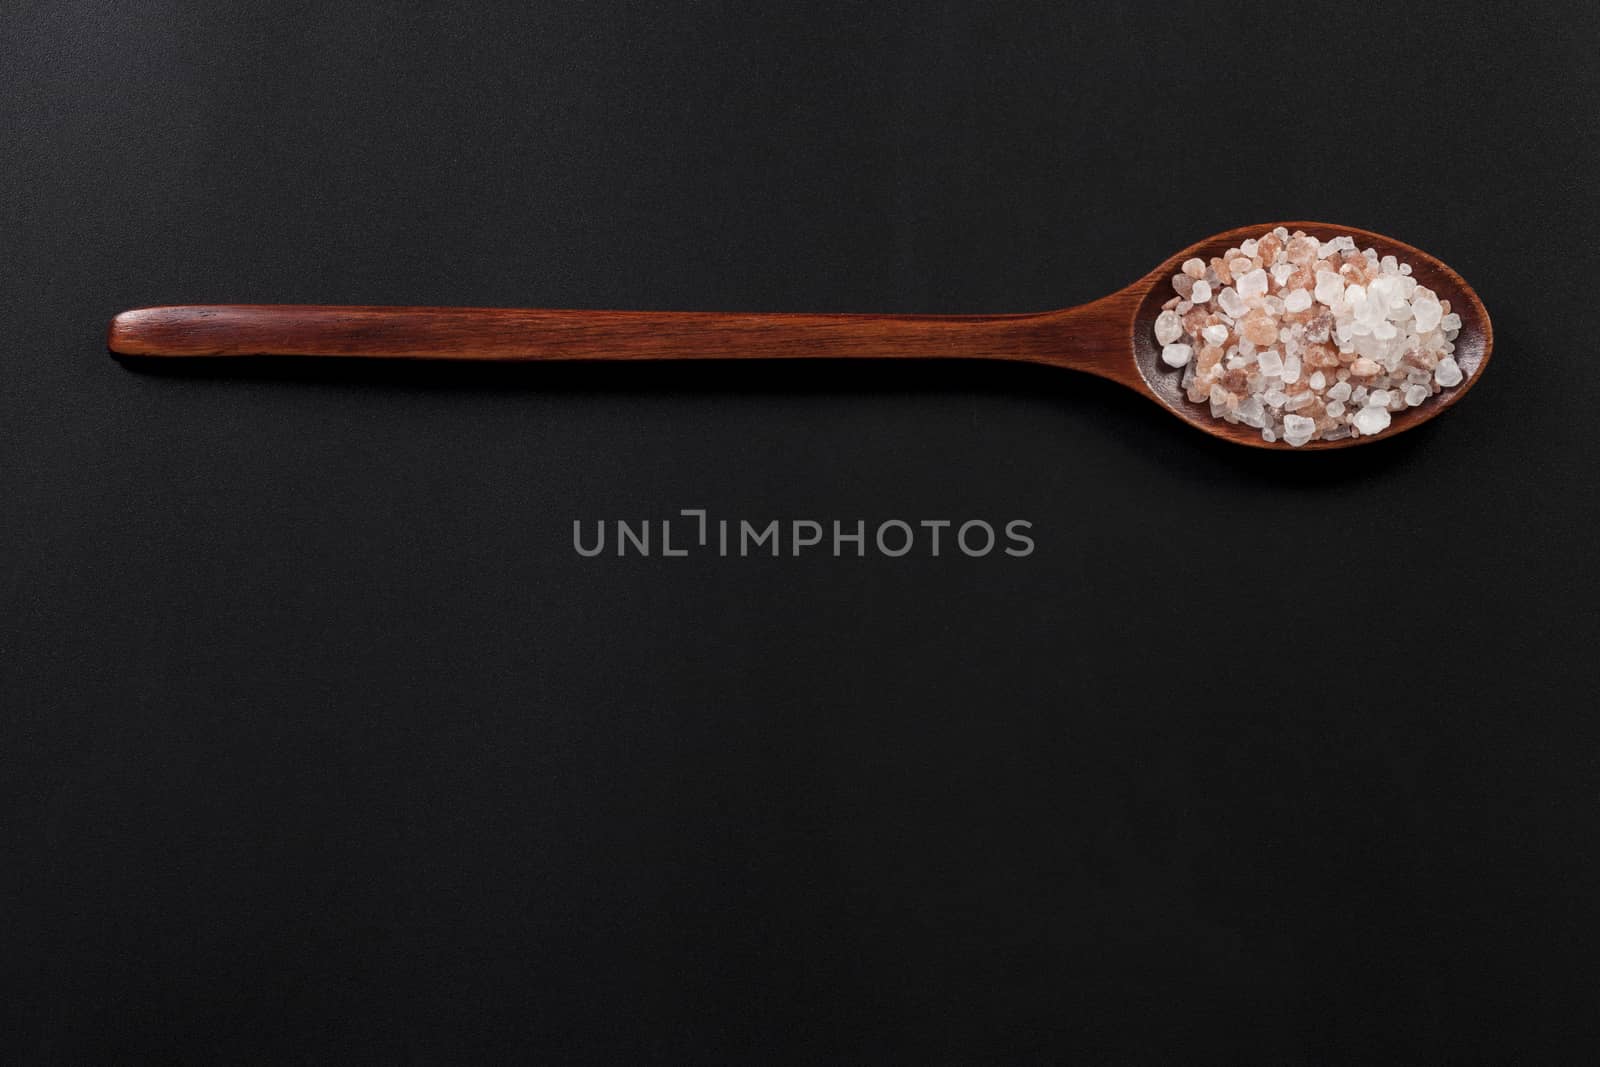 Wood Spoon Full With Himalayan Salt on Gray Background